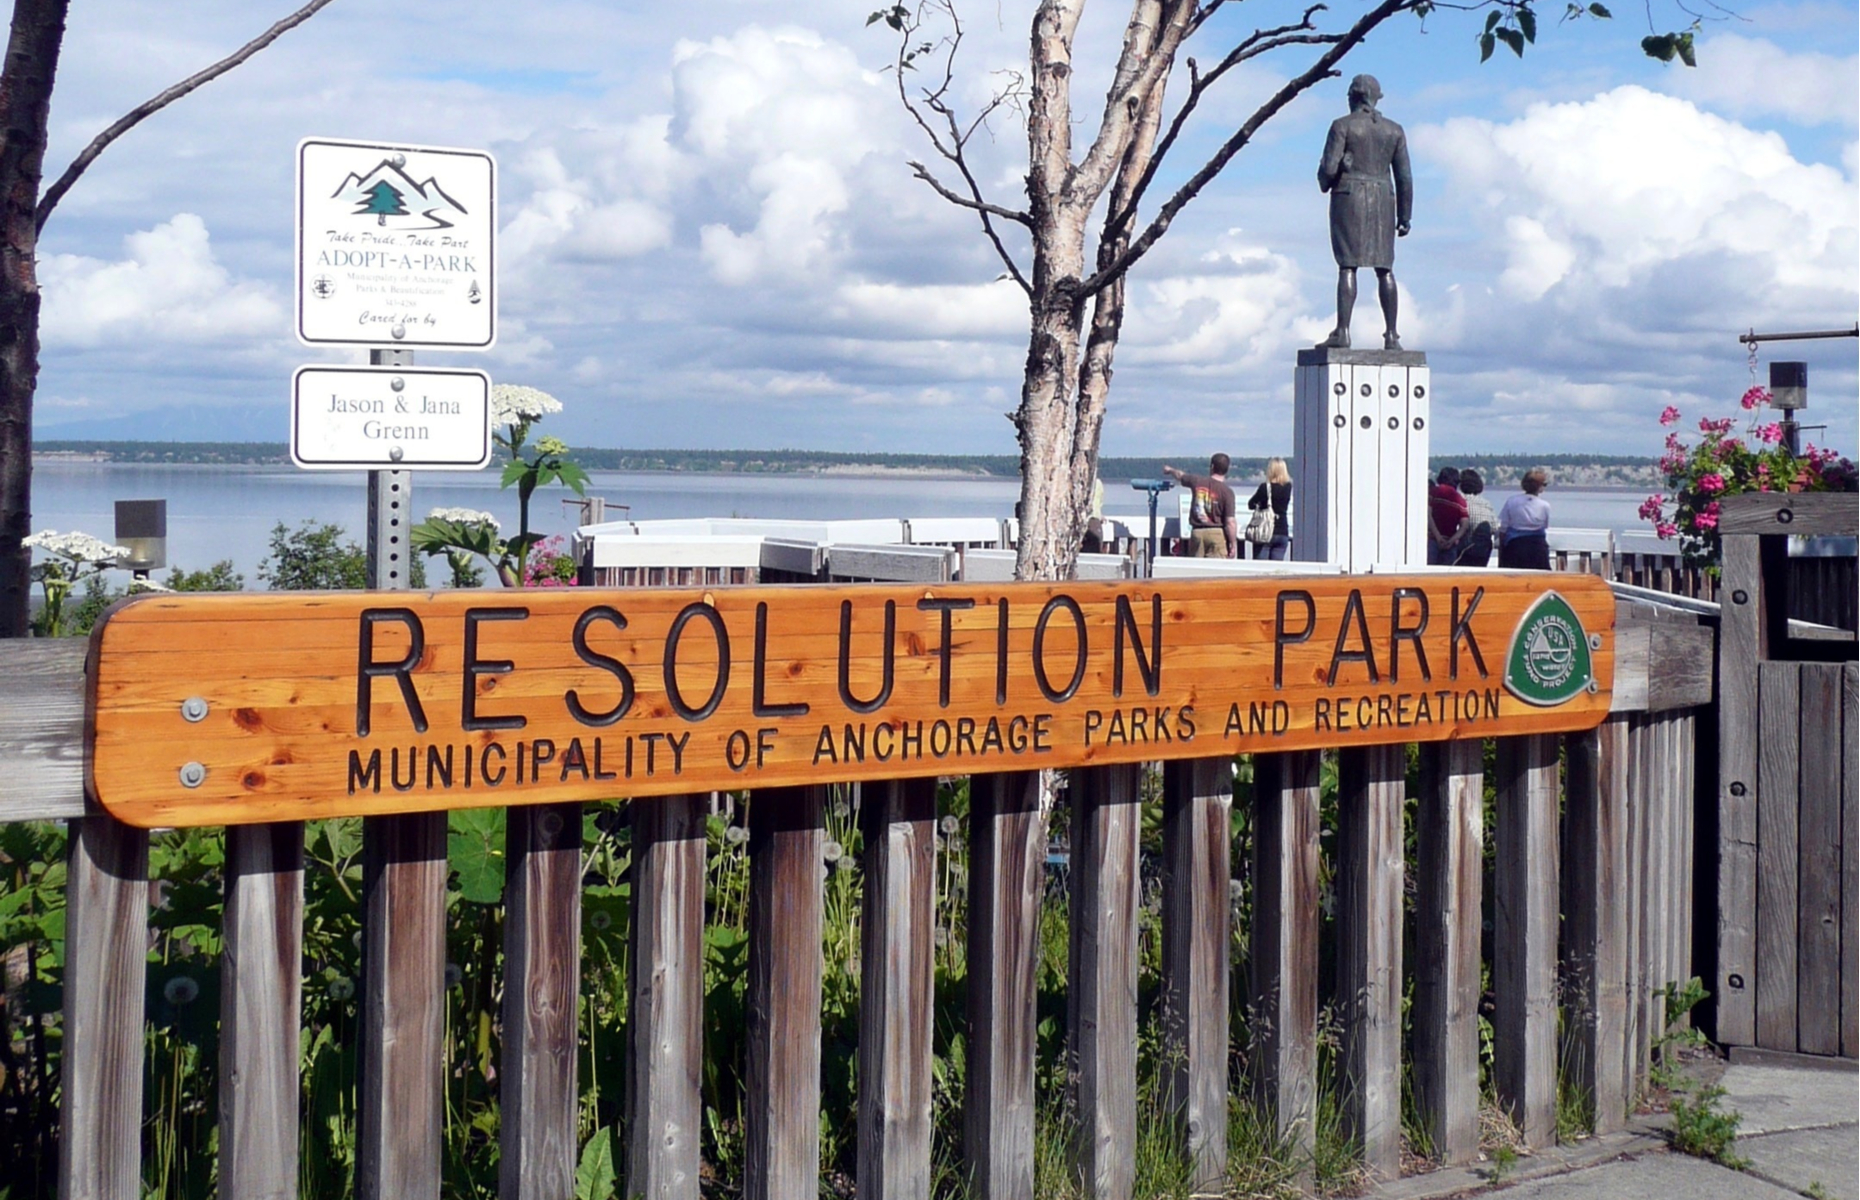 Resolution Park, Anchorage (Image: Mr Privacy/Shutterstock)